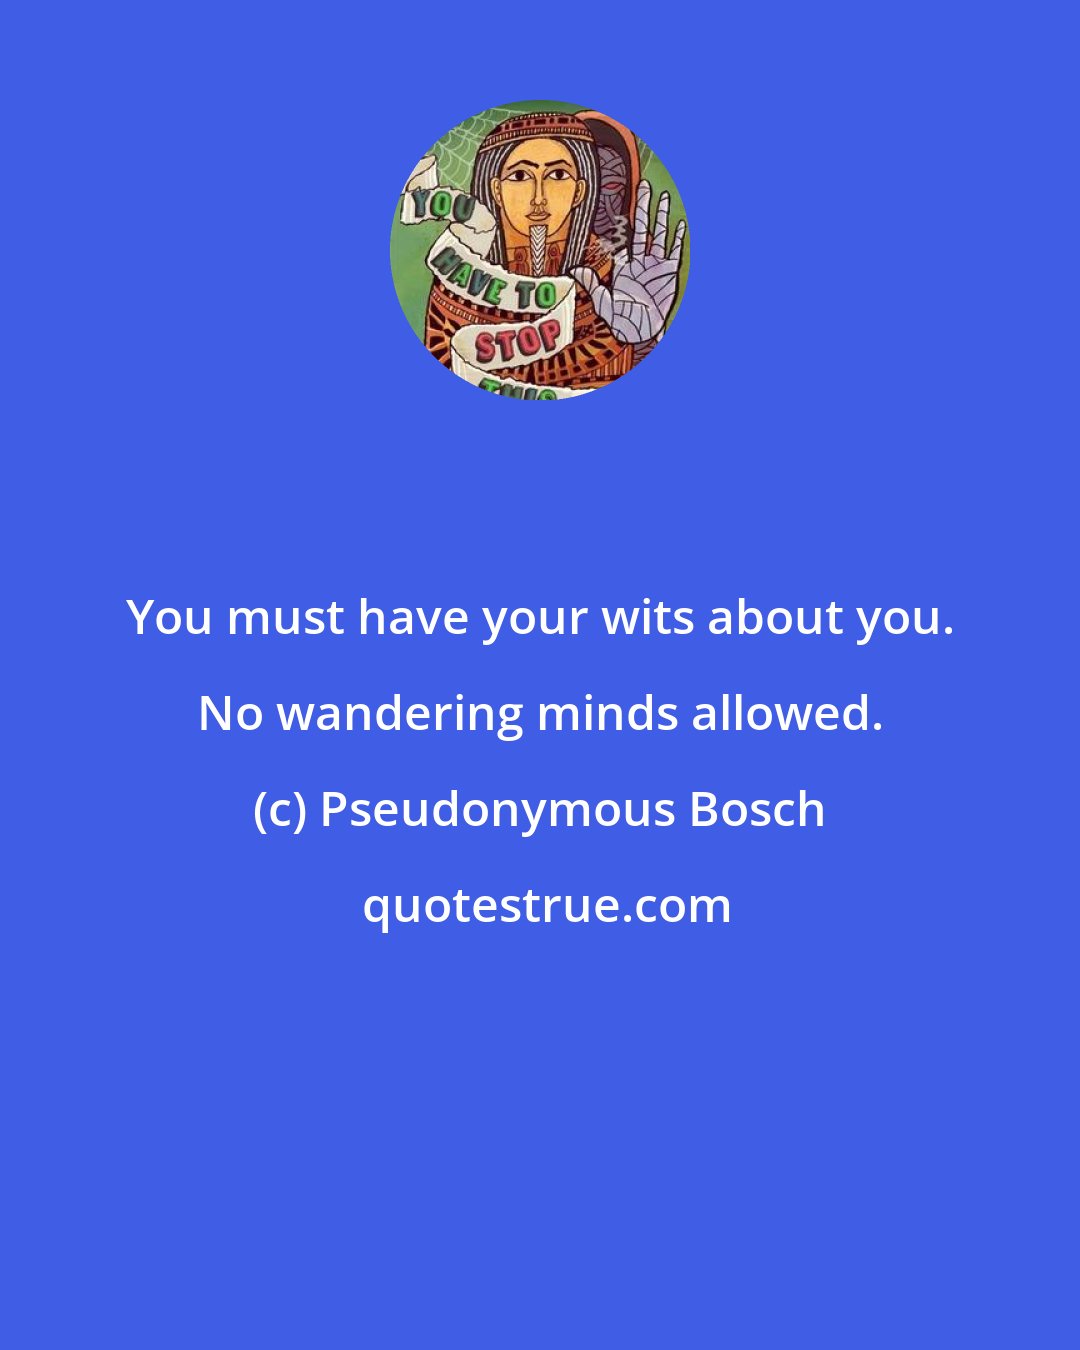 Pseudonymous Bosch: You must have your wits about you. No wandering minds allowed.